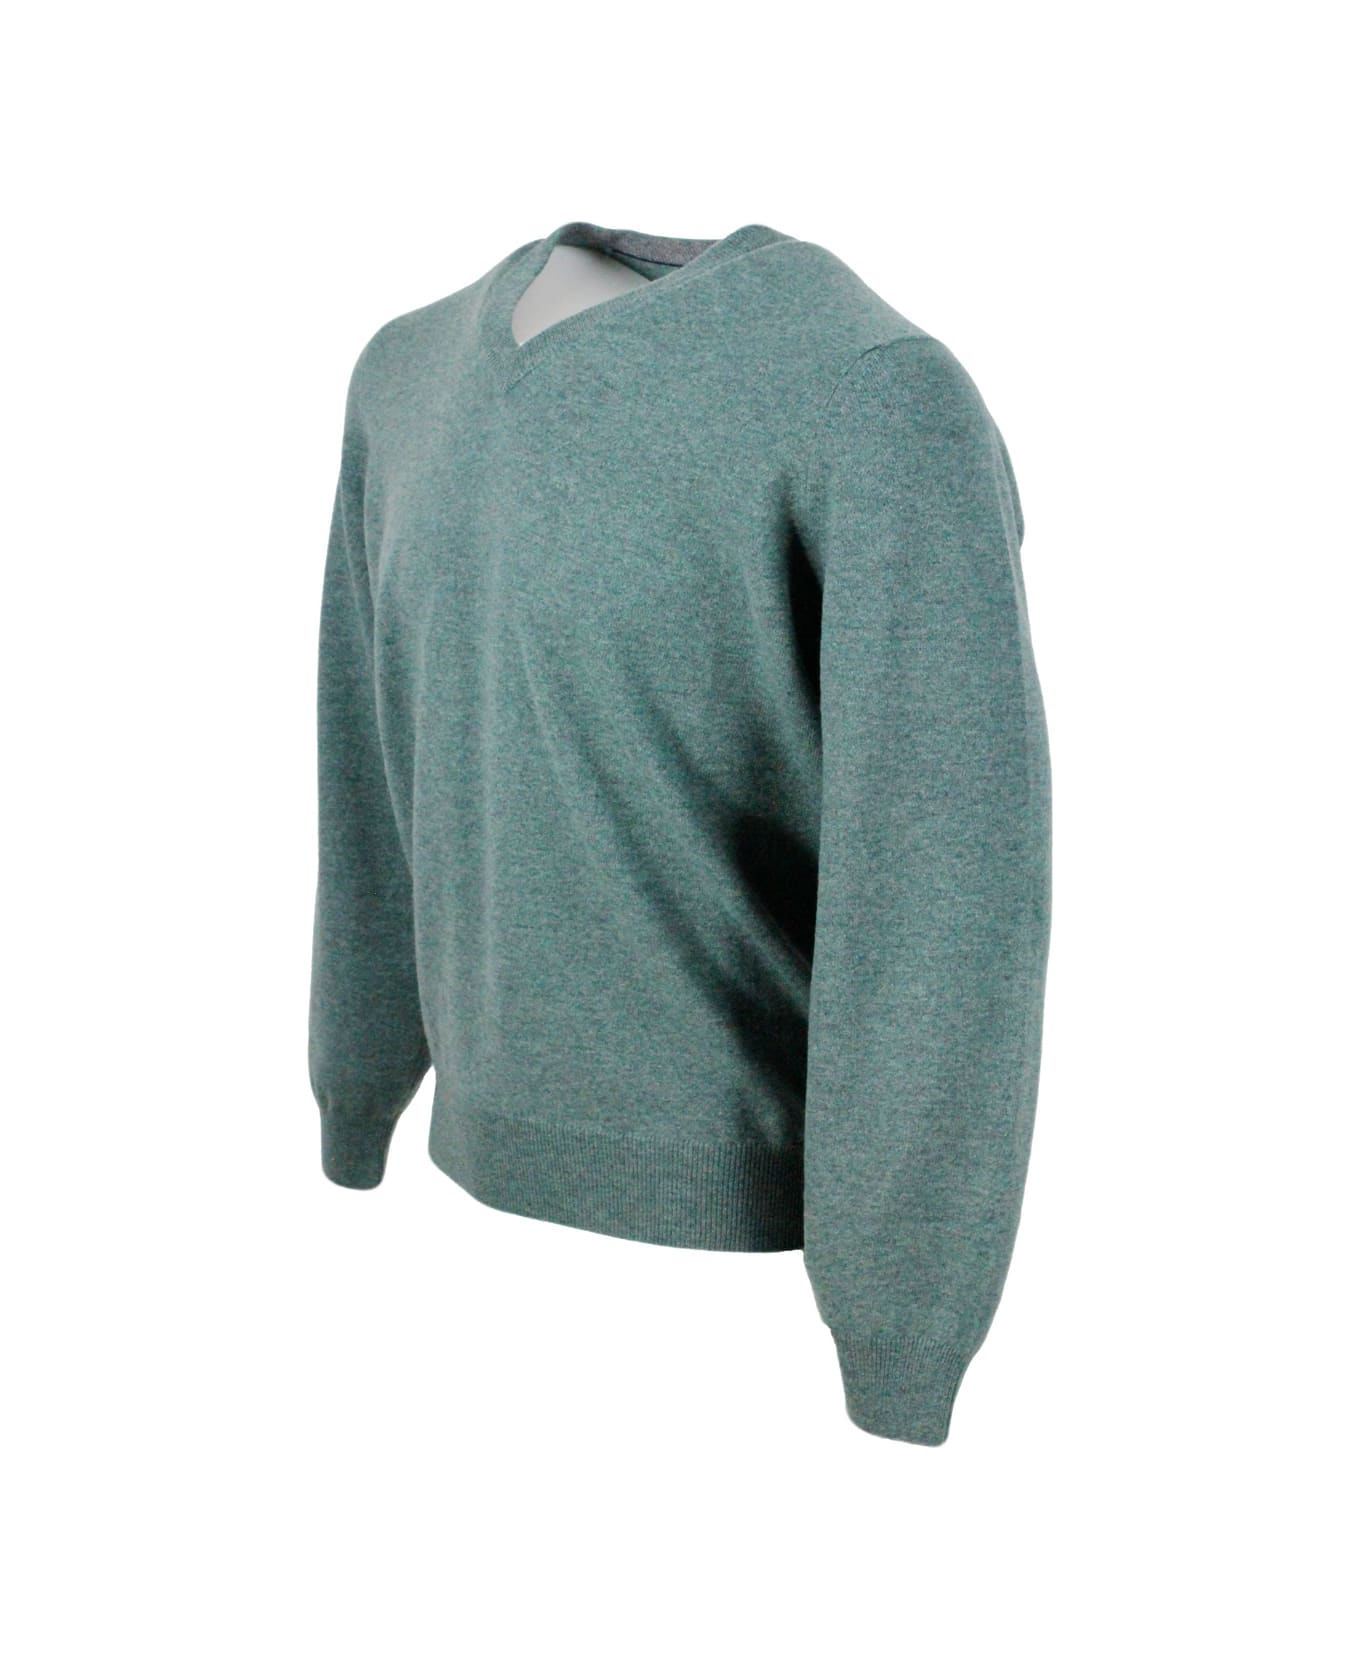 Brunello Cucinelli Long-sleeved V-neck Sweater In Fine 100% Cashmere With Contrasting Piping On The Cuff - Green ニットウェア